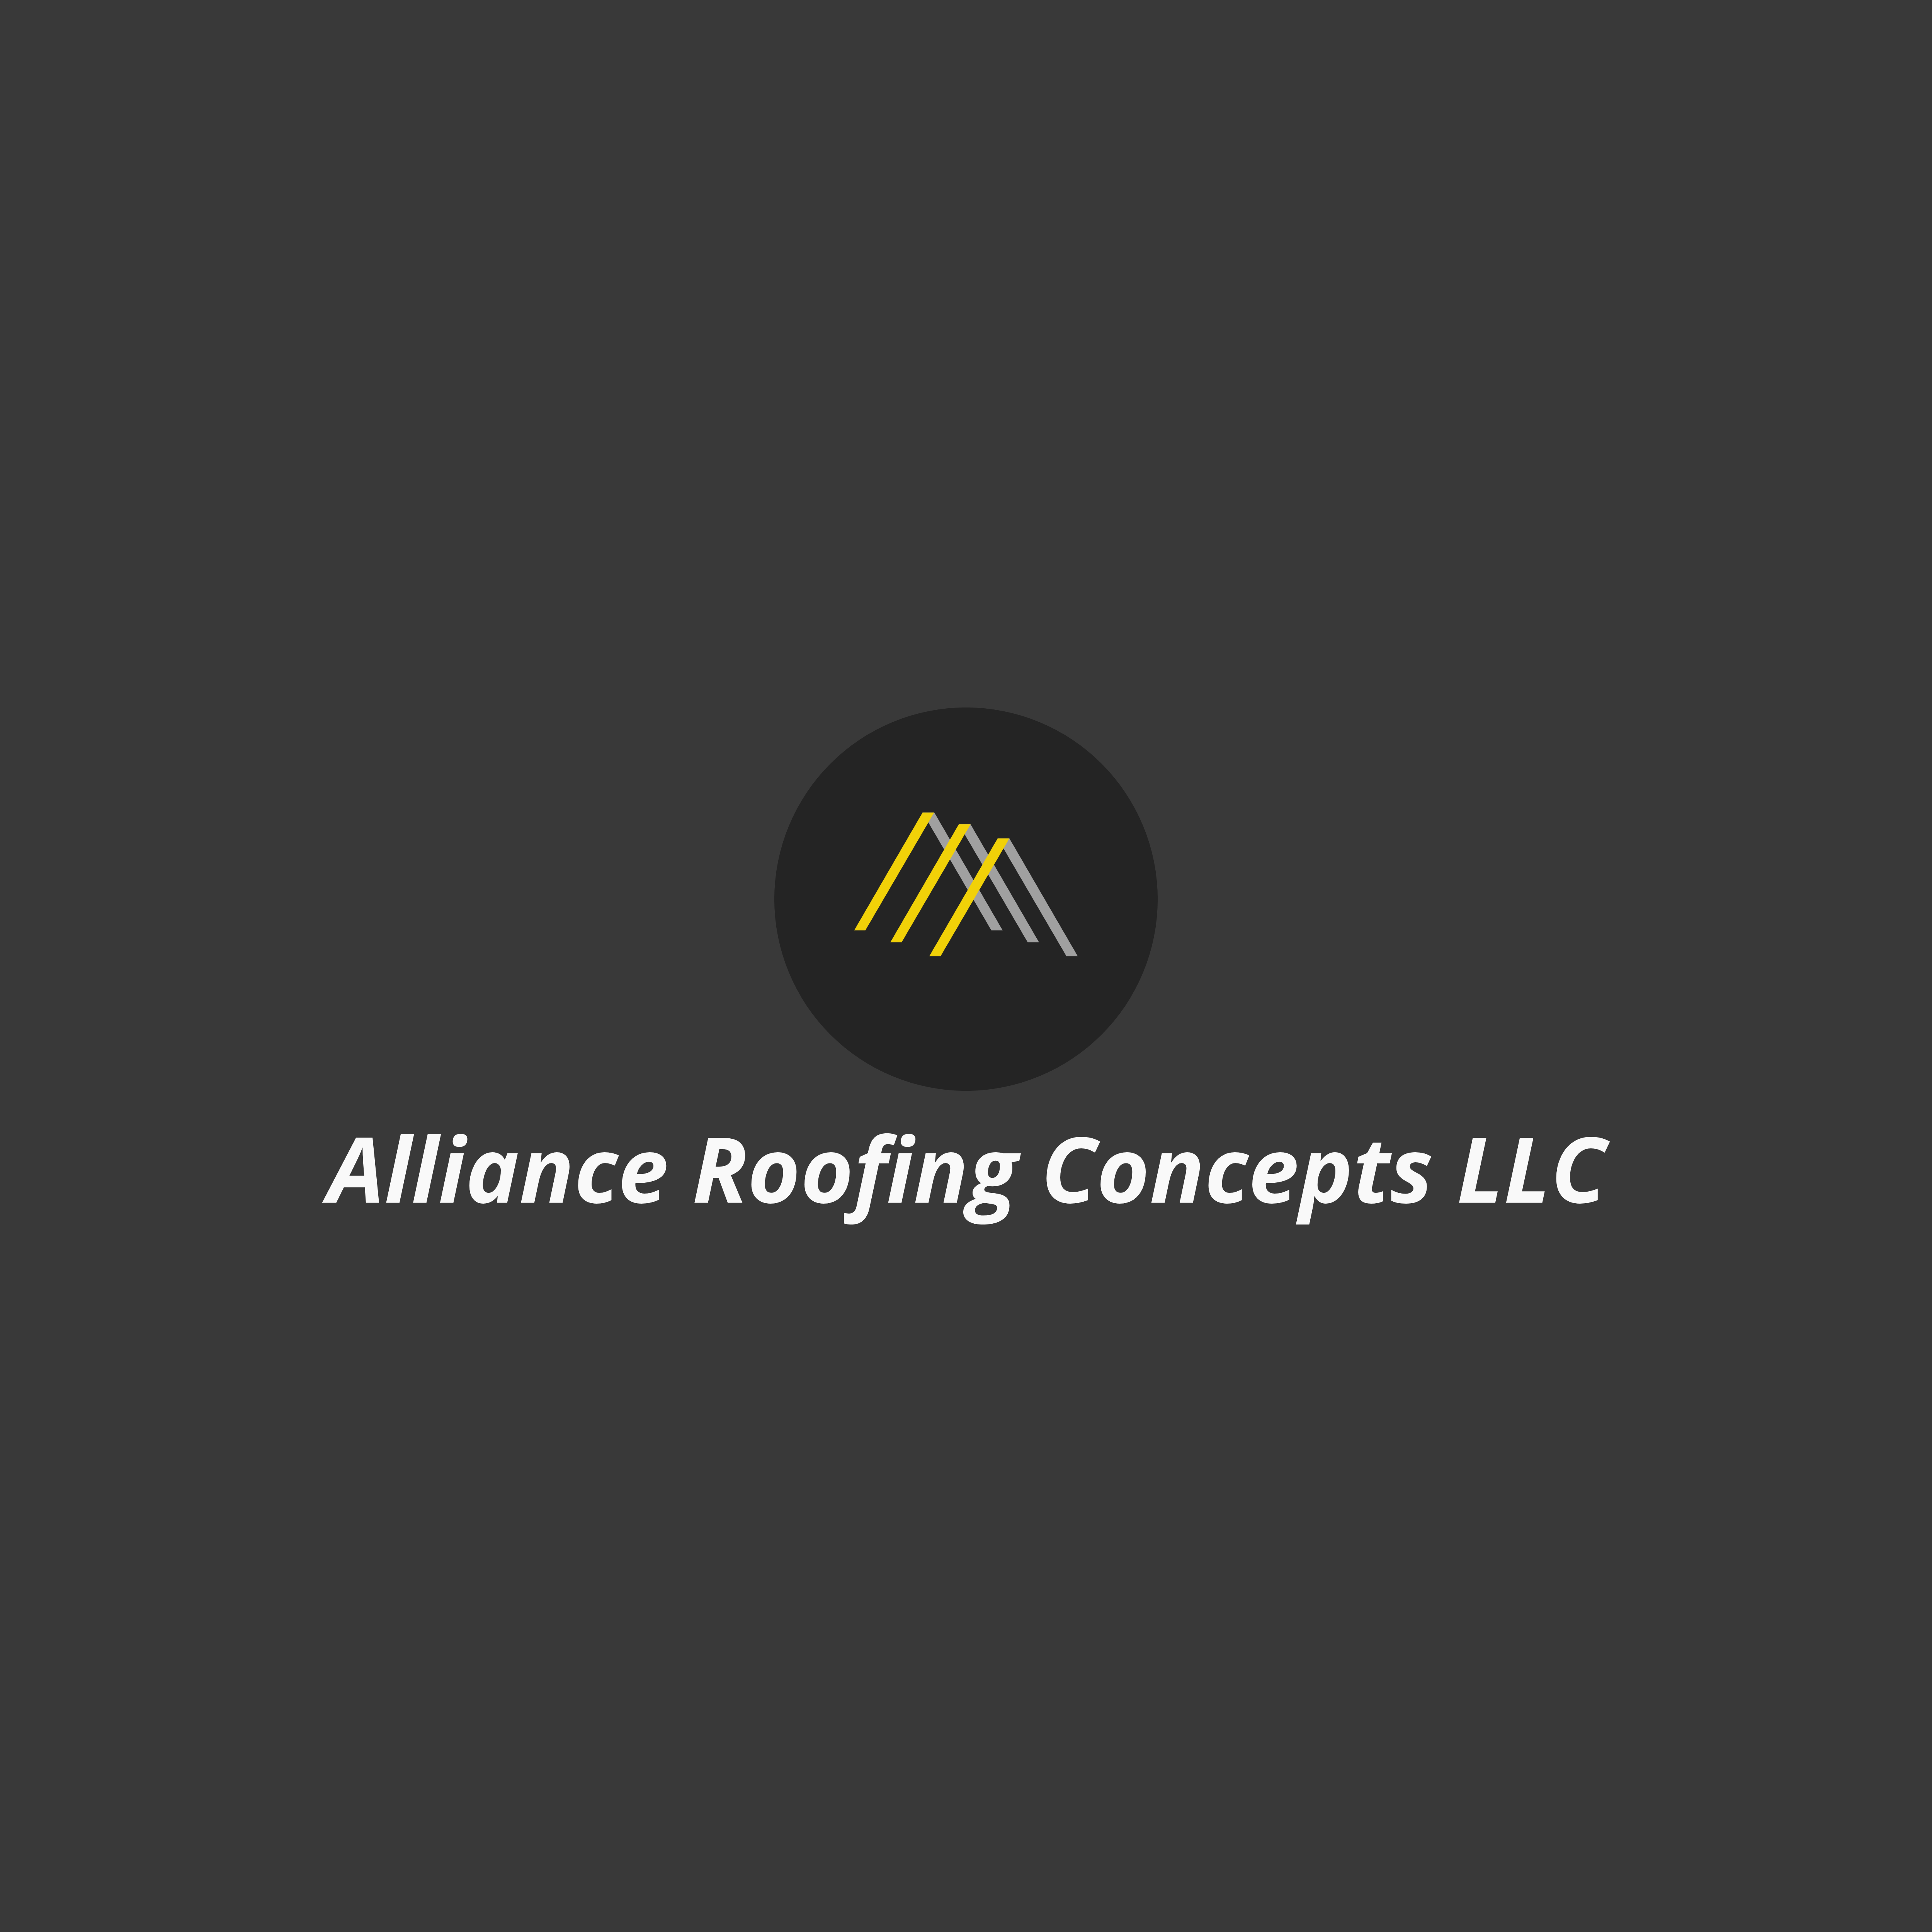 Alliance Roofing Concepts LLC Logo